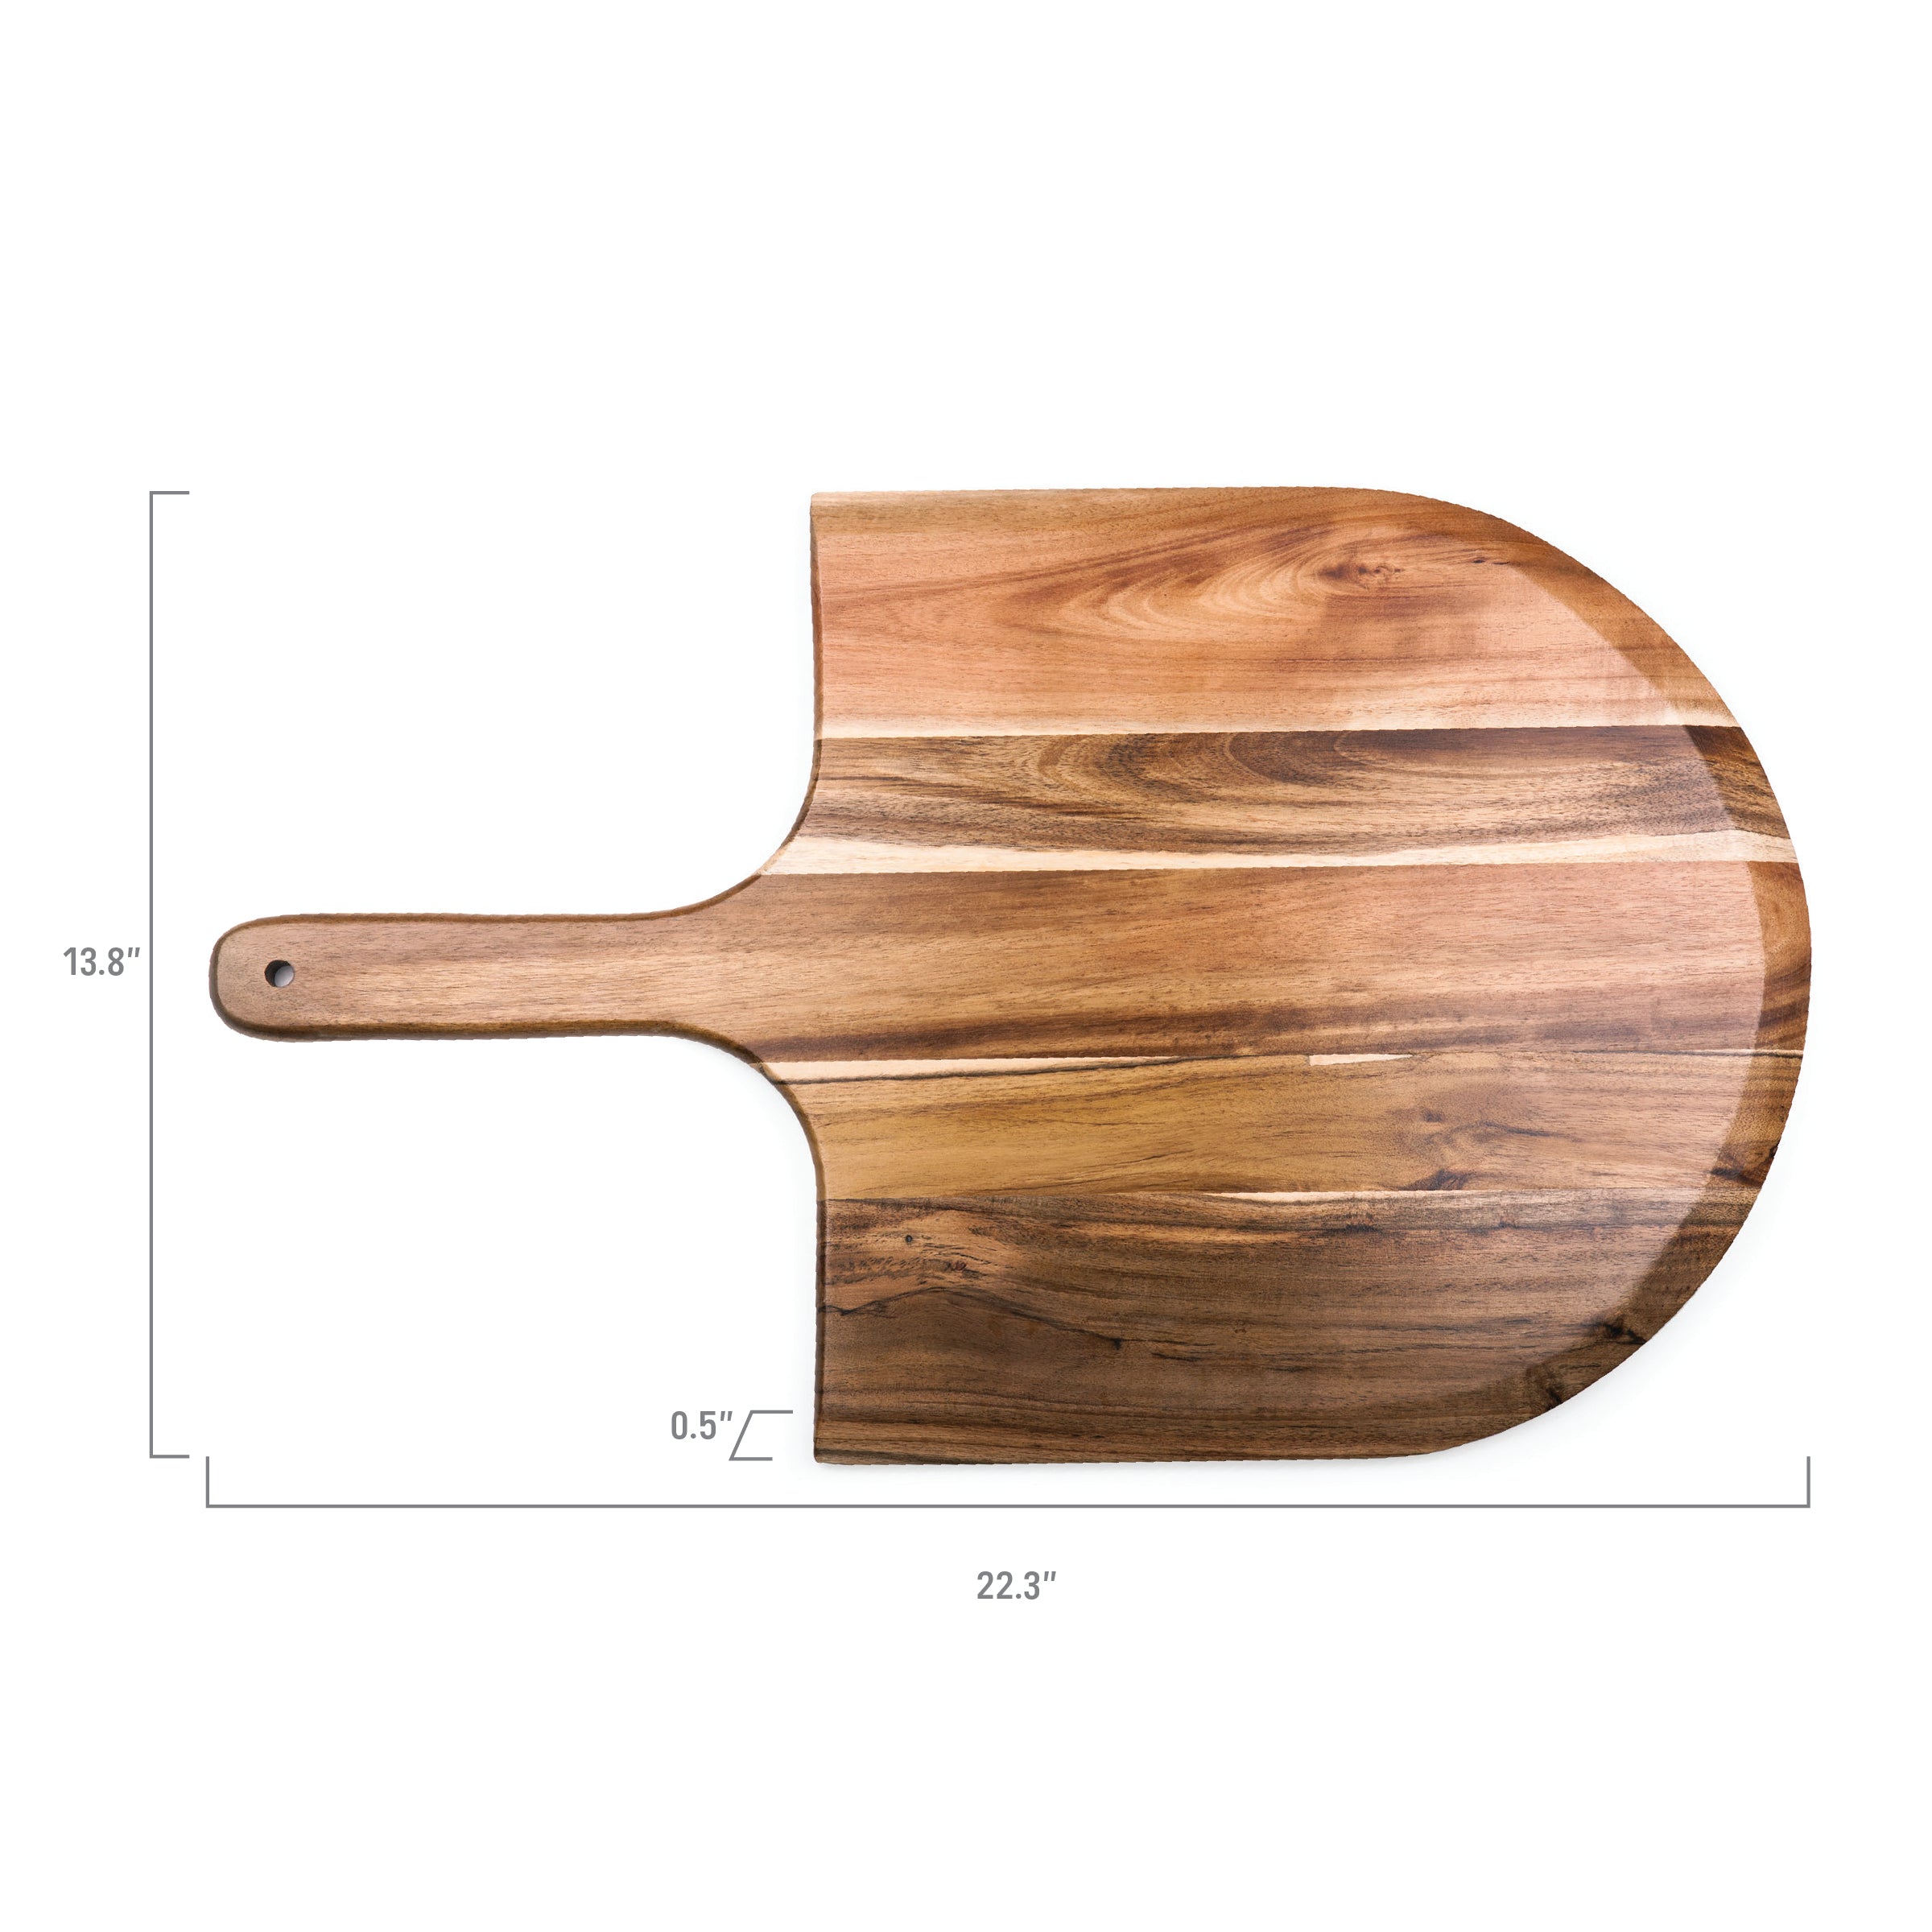 Baltimore Orioles - Acacia Pizza Peel Serving Paddle